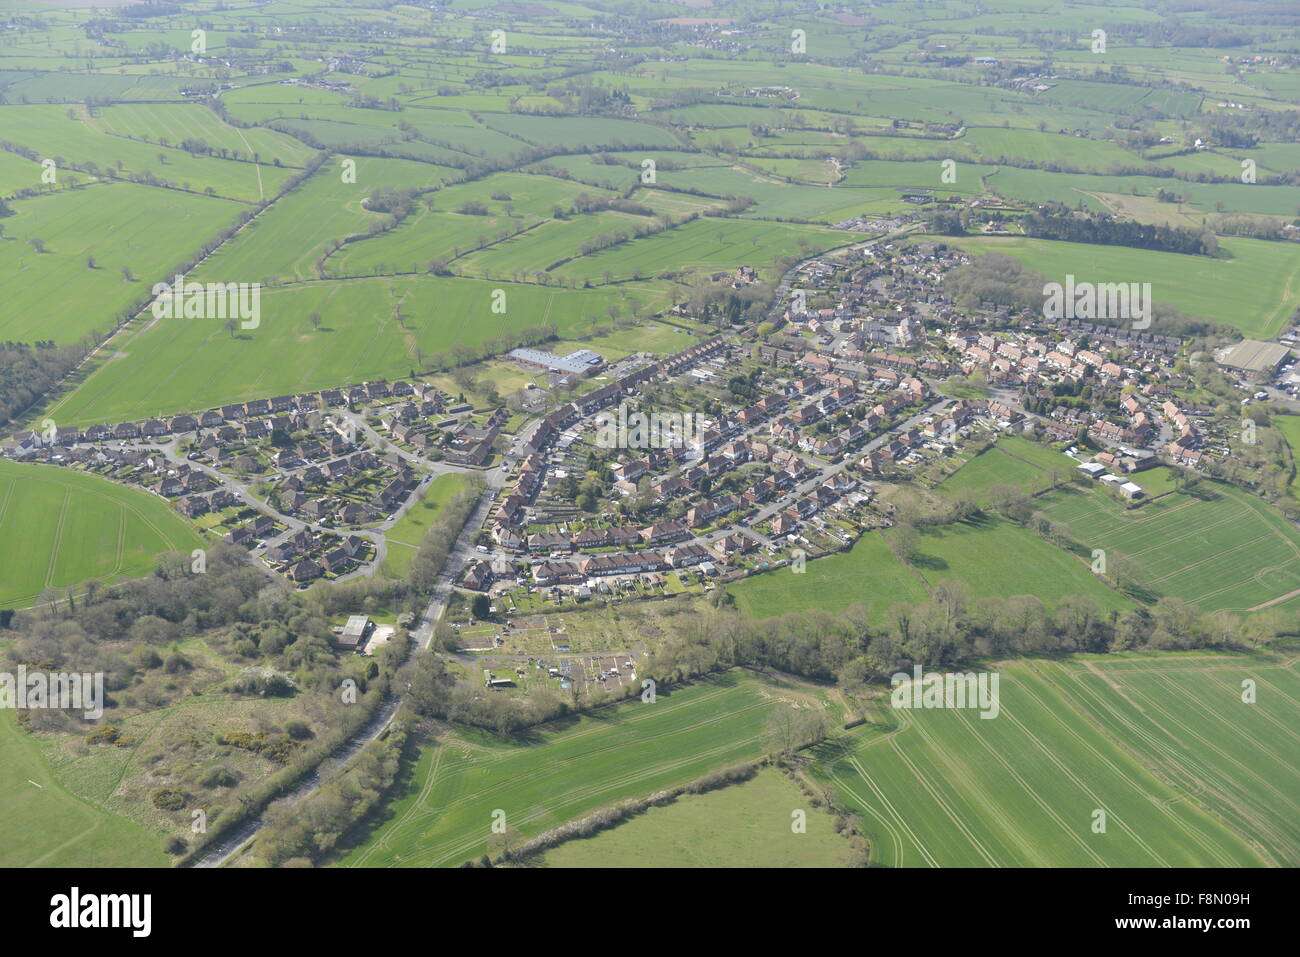 An aerial view of the Warwickshire village of New Arley and surrounding countryside Stock Photo